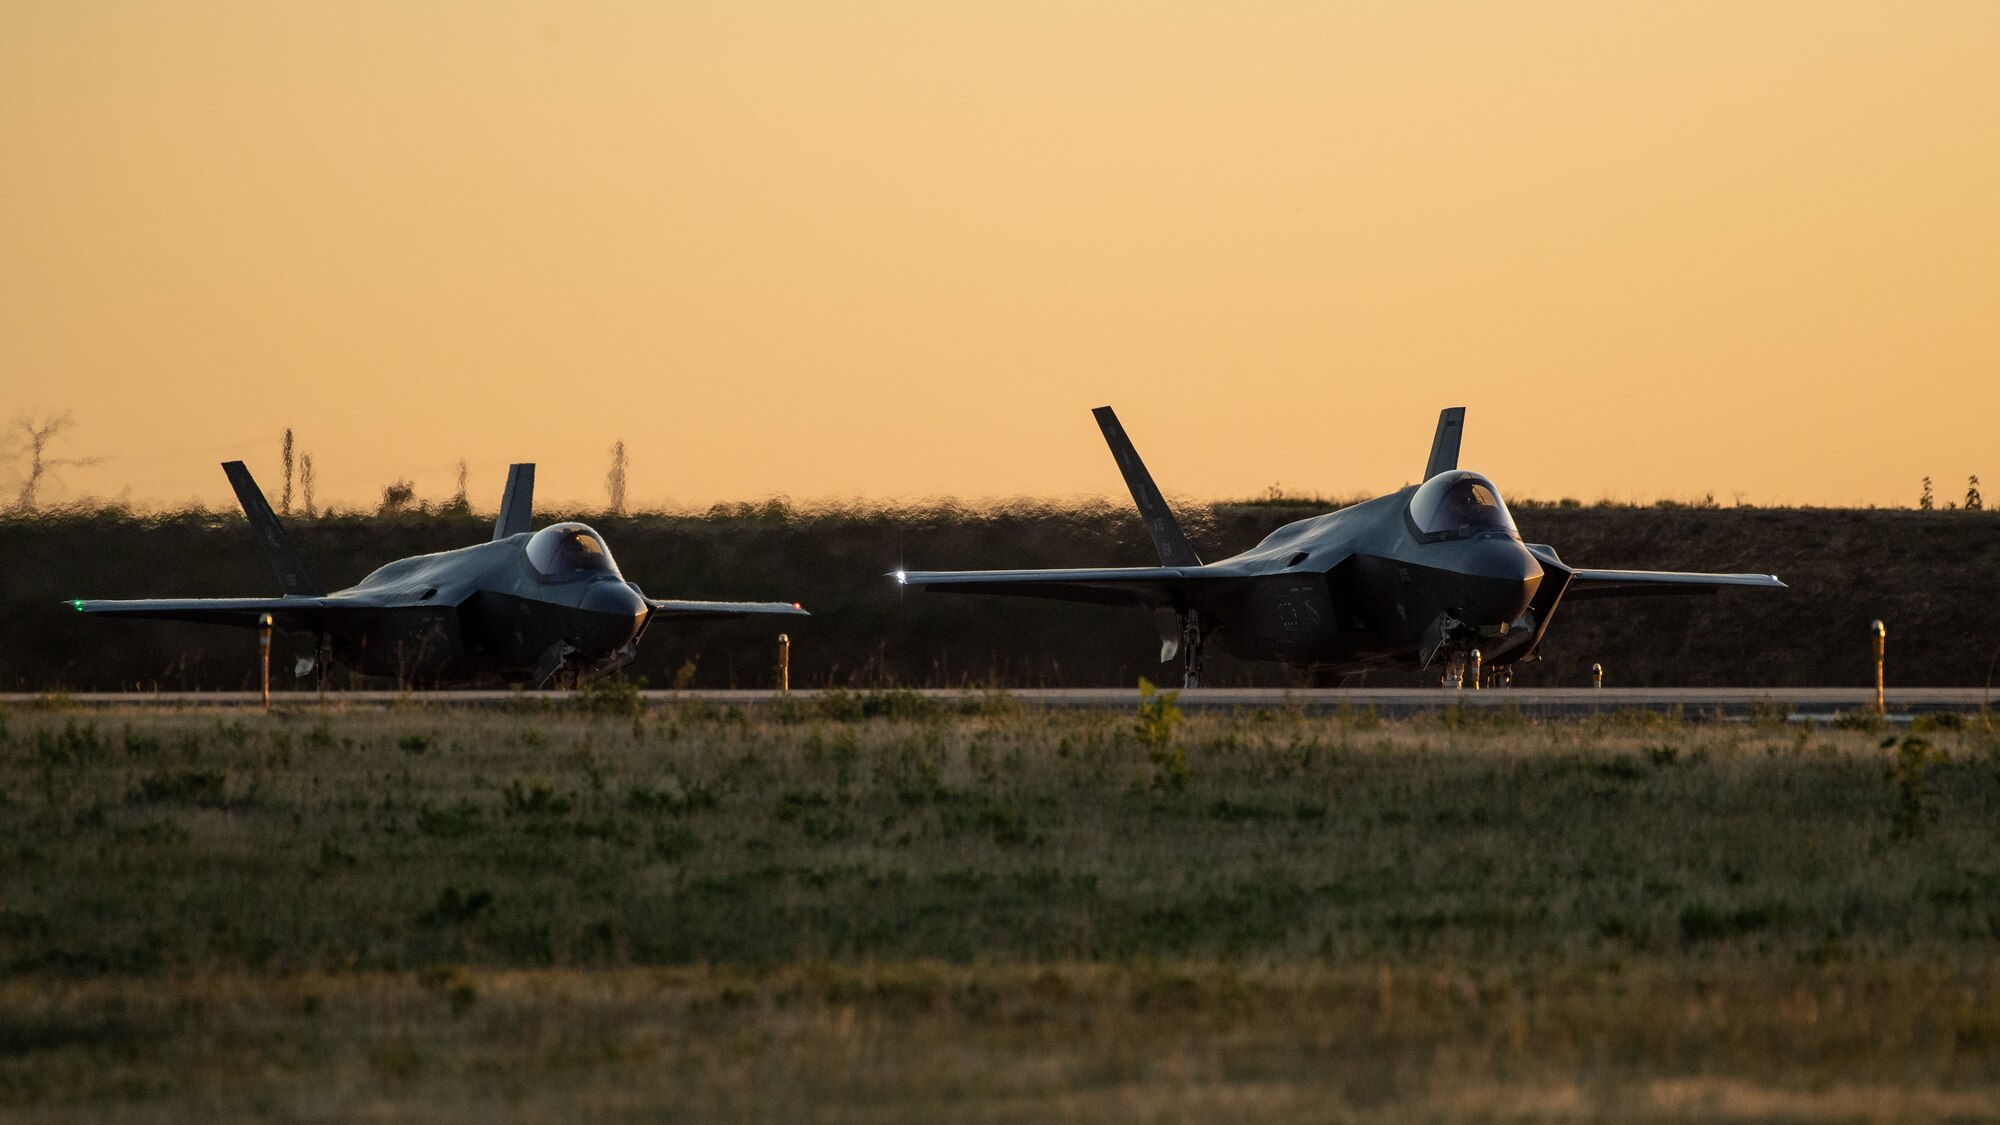 F-35As prepare to take off from Hill Air Force Base, Utah, the evening of Aug. 20, 2019, as the active duty 388th and reserve 419th Fighter Wings conducted local night flying operations. The wings are required to train at night to maintain their readiness and all-weather capabilities. Increased flying also provides a valuable opportunity to evaluate aircraft maintenance resiliency and operational agility. (U.S. Air Force photos by R. Nial Bradshaw)